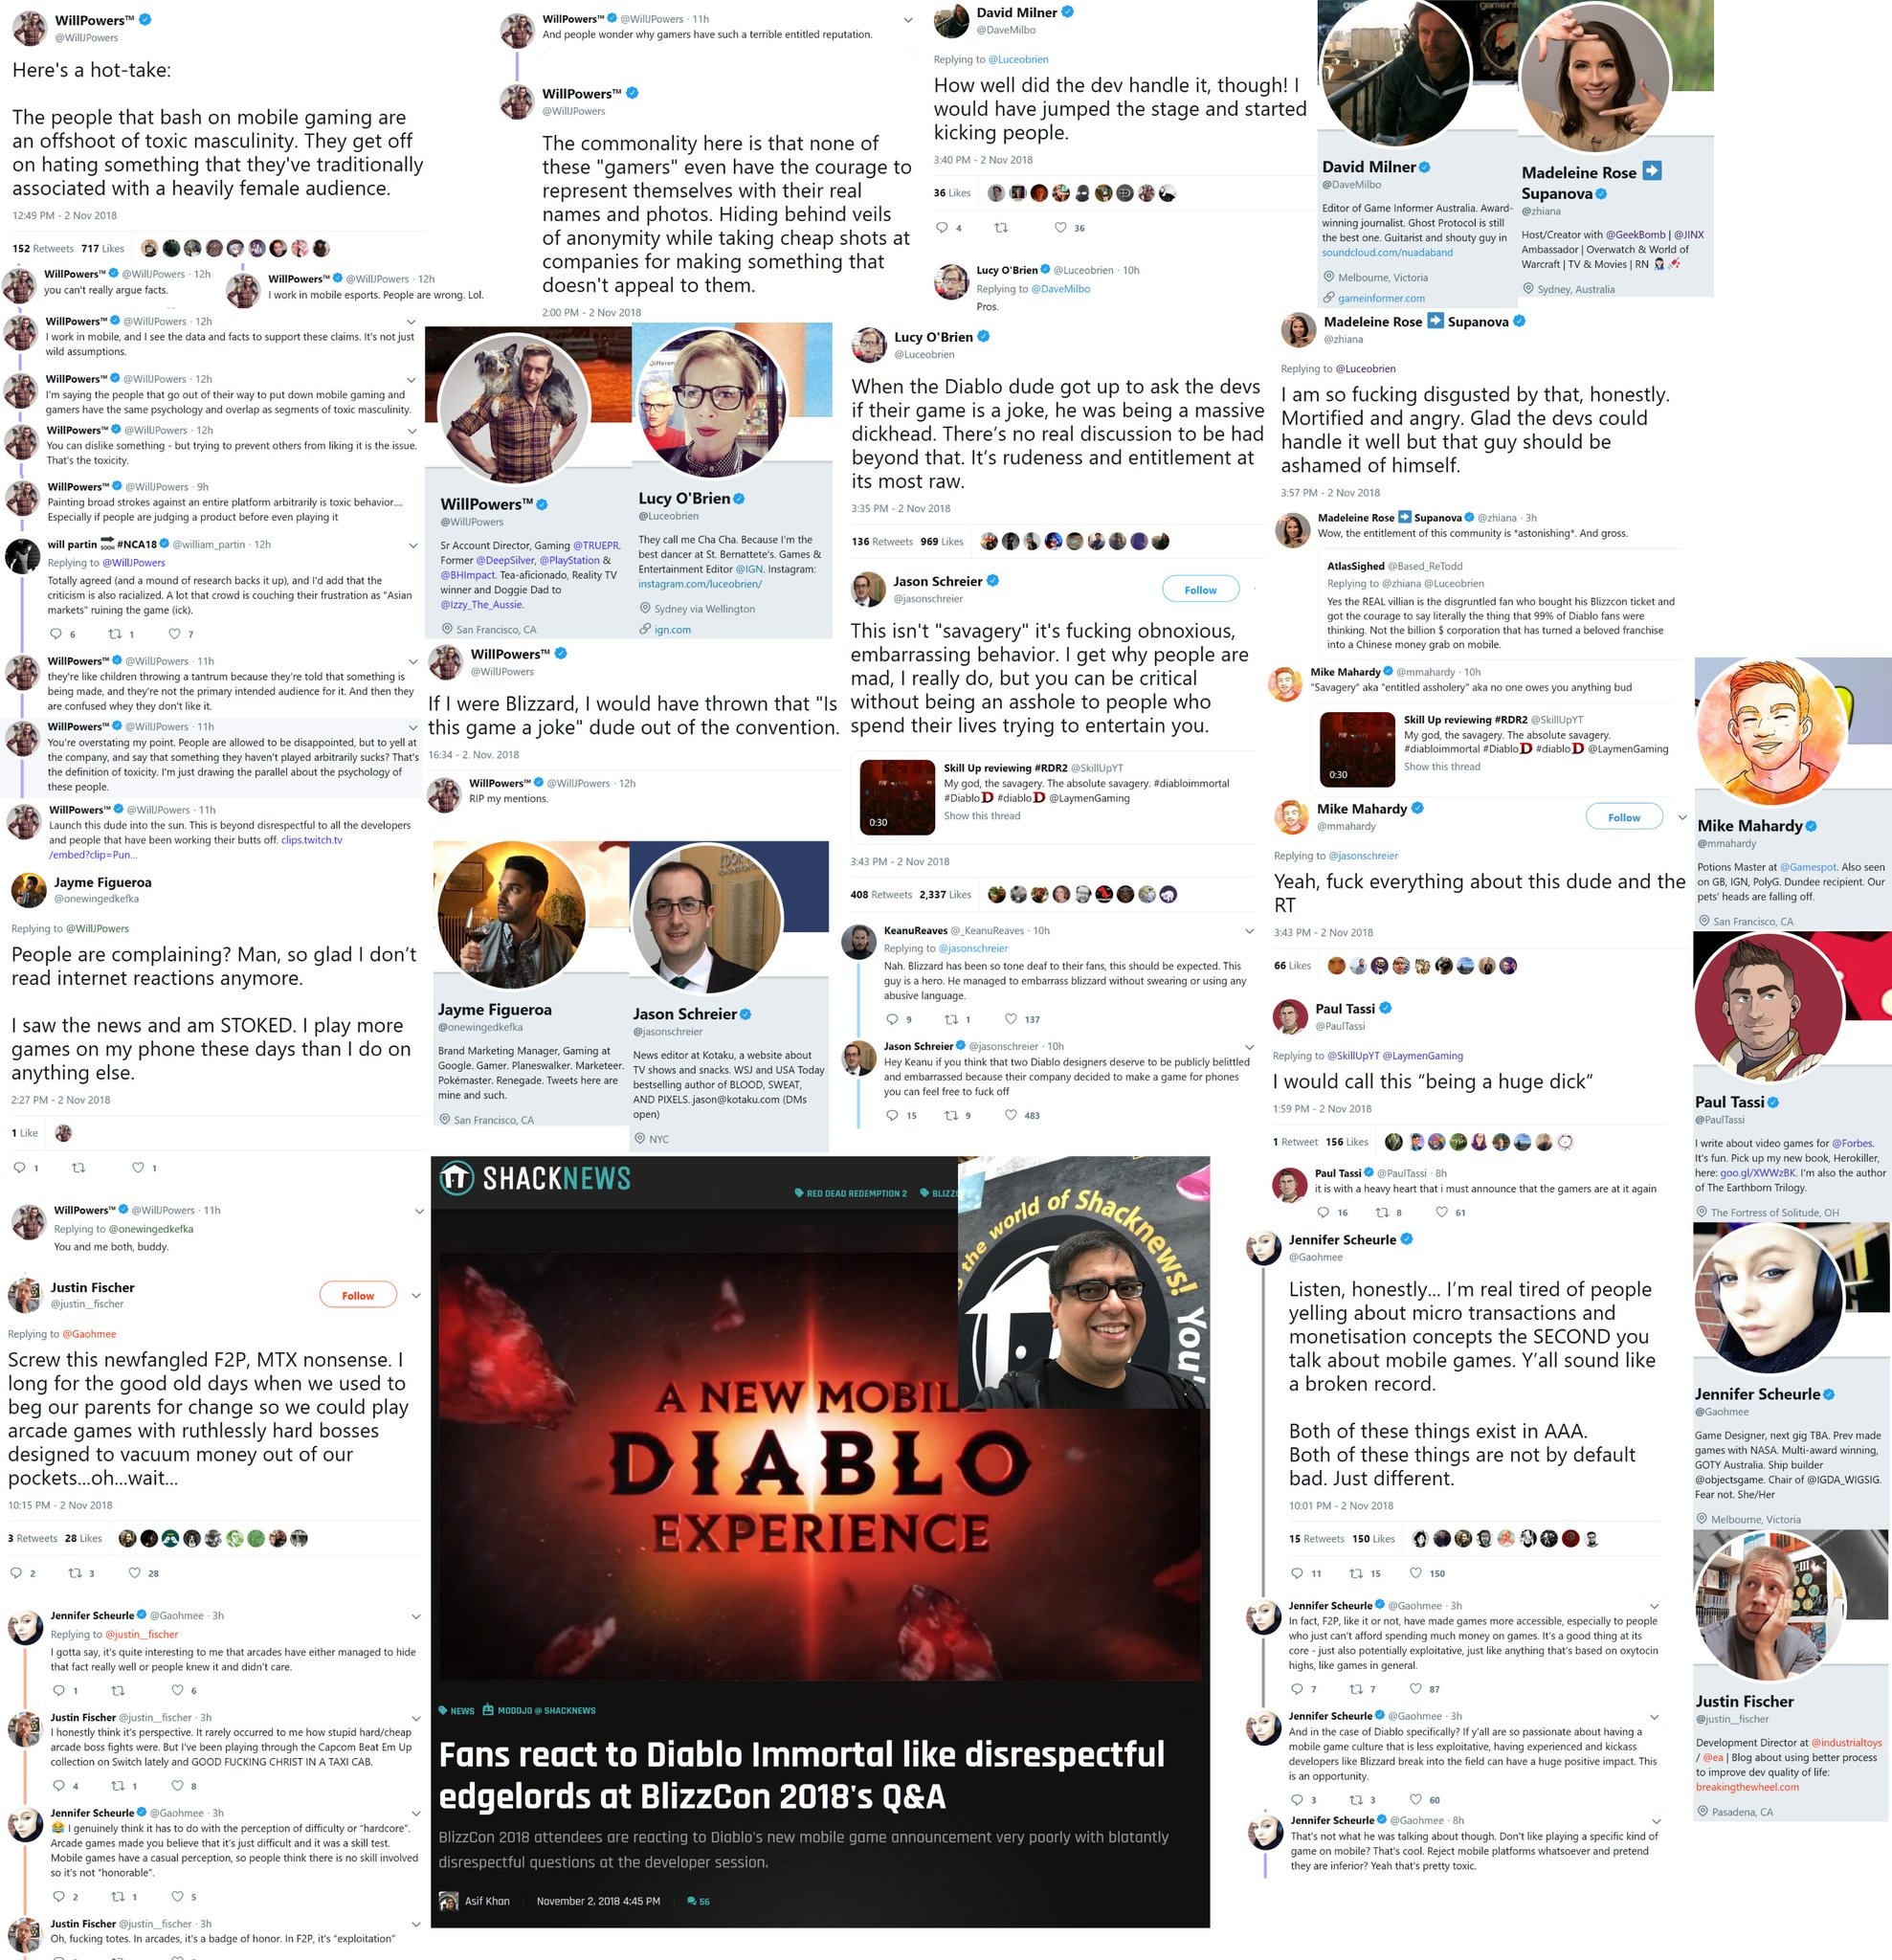 gamers hate diablo immortal because of misogyny